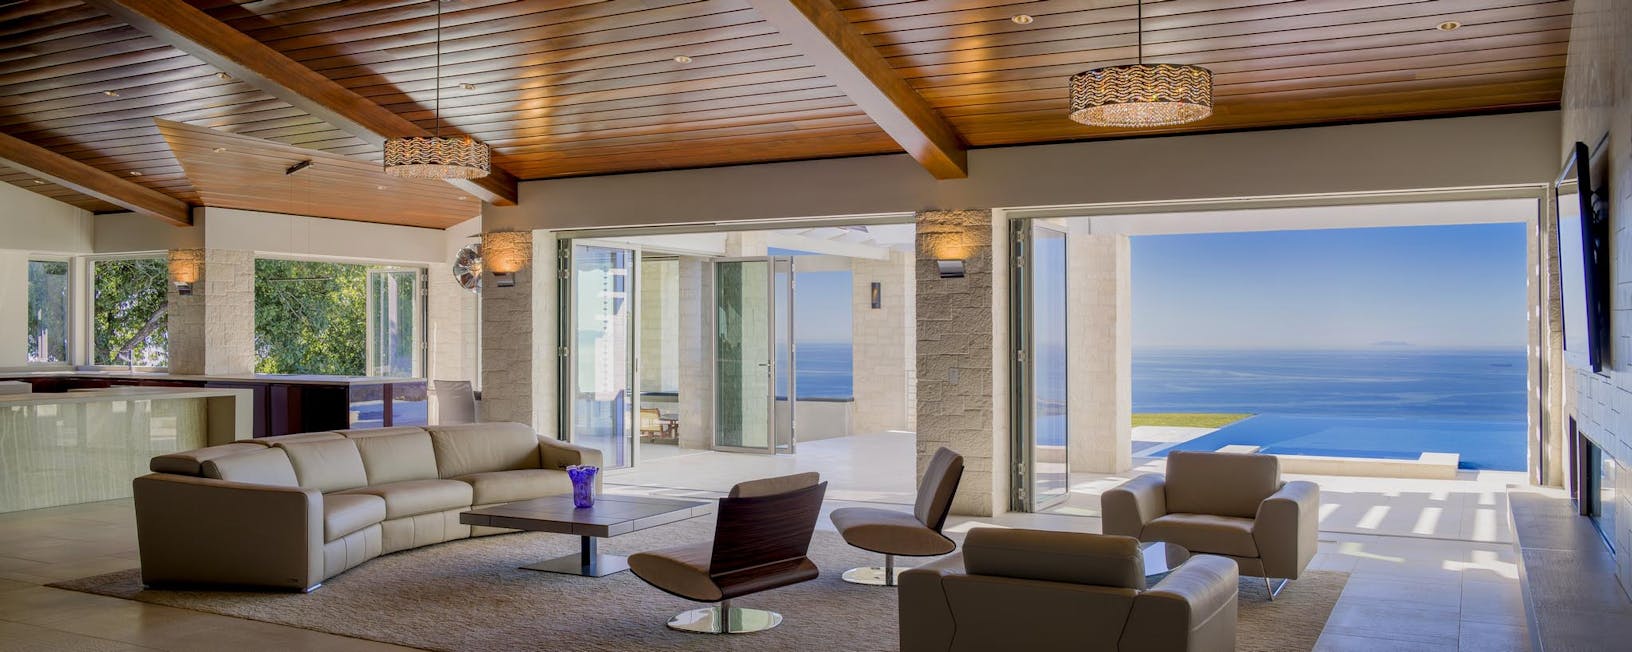 SL45 a modern oceanfront living room with a large glass door